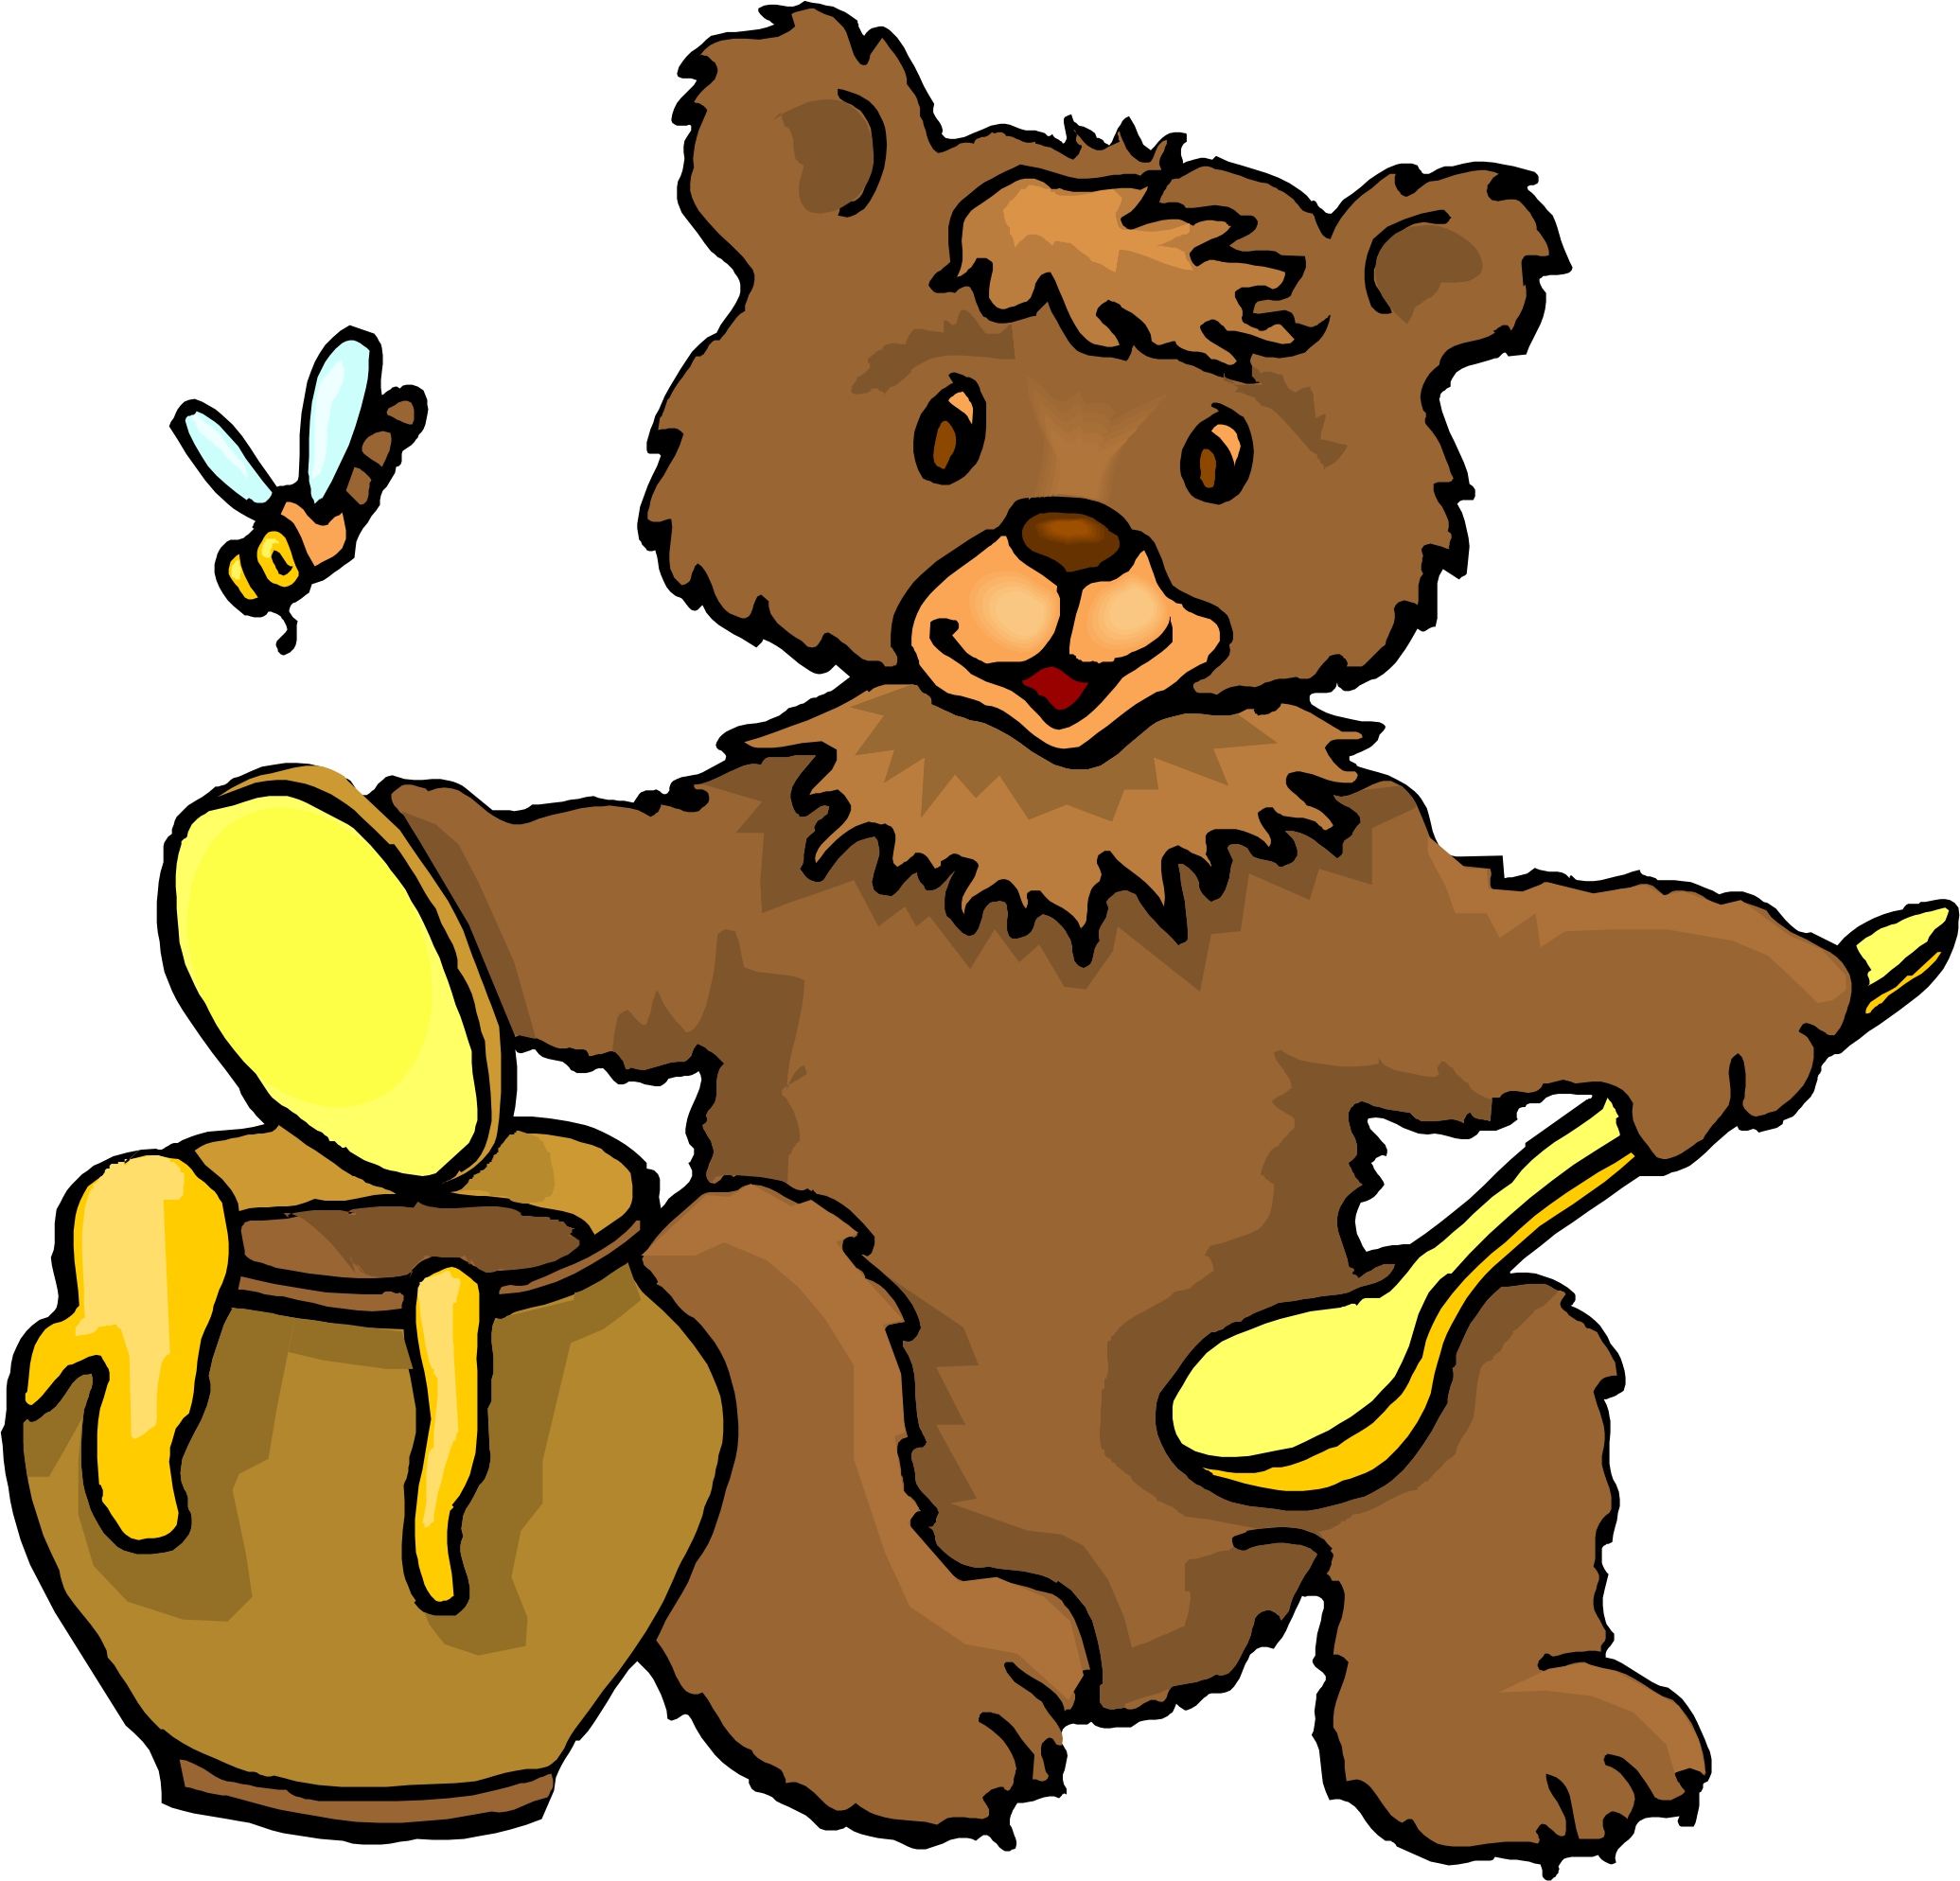 Images Of Cartoon Bears - ClipArt Best